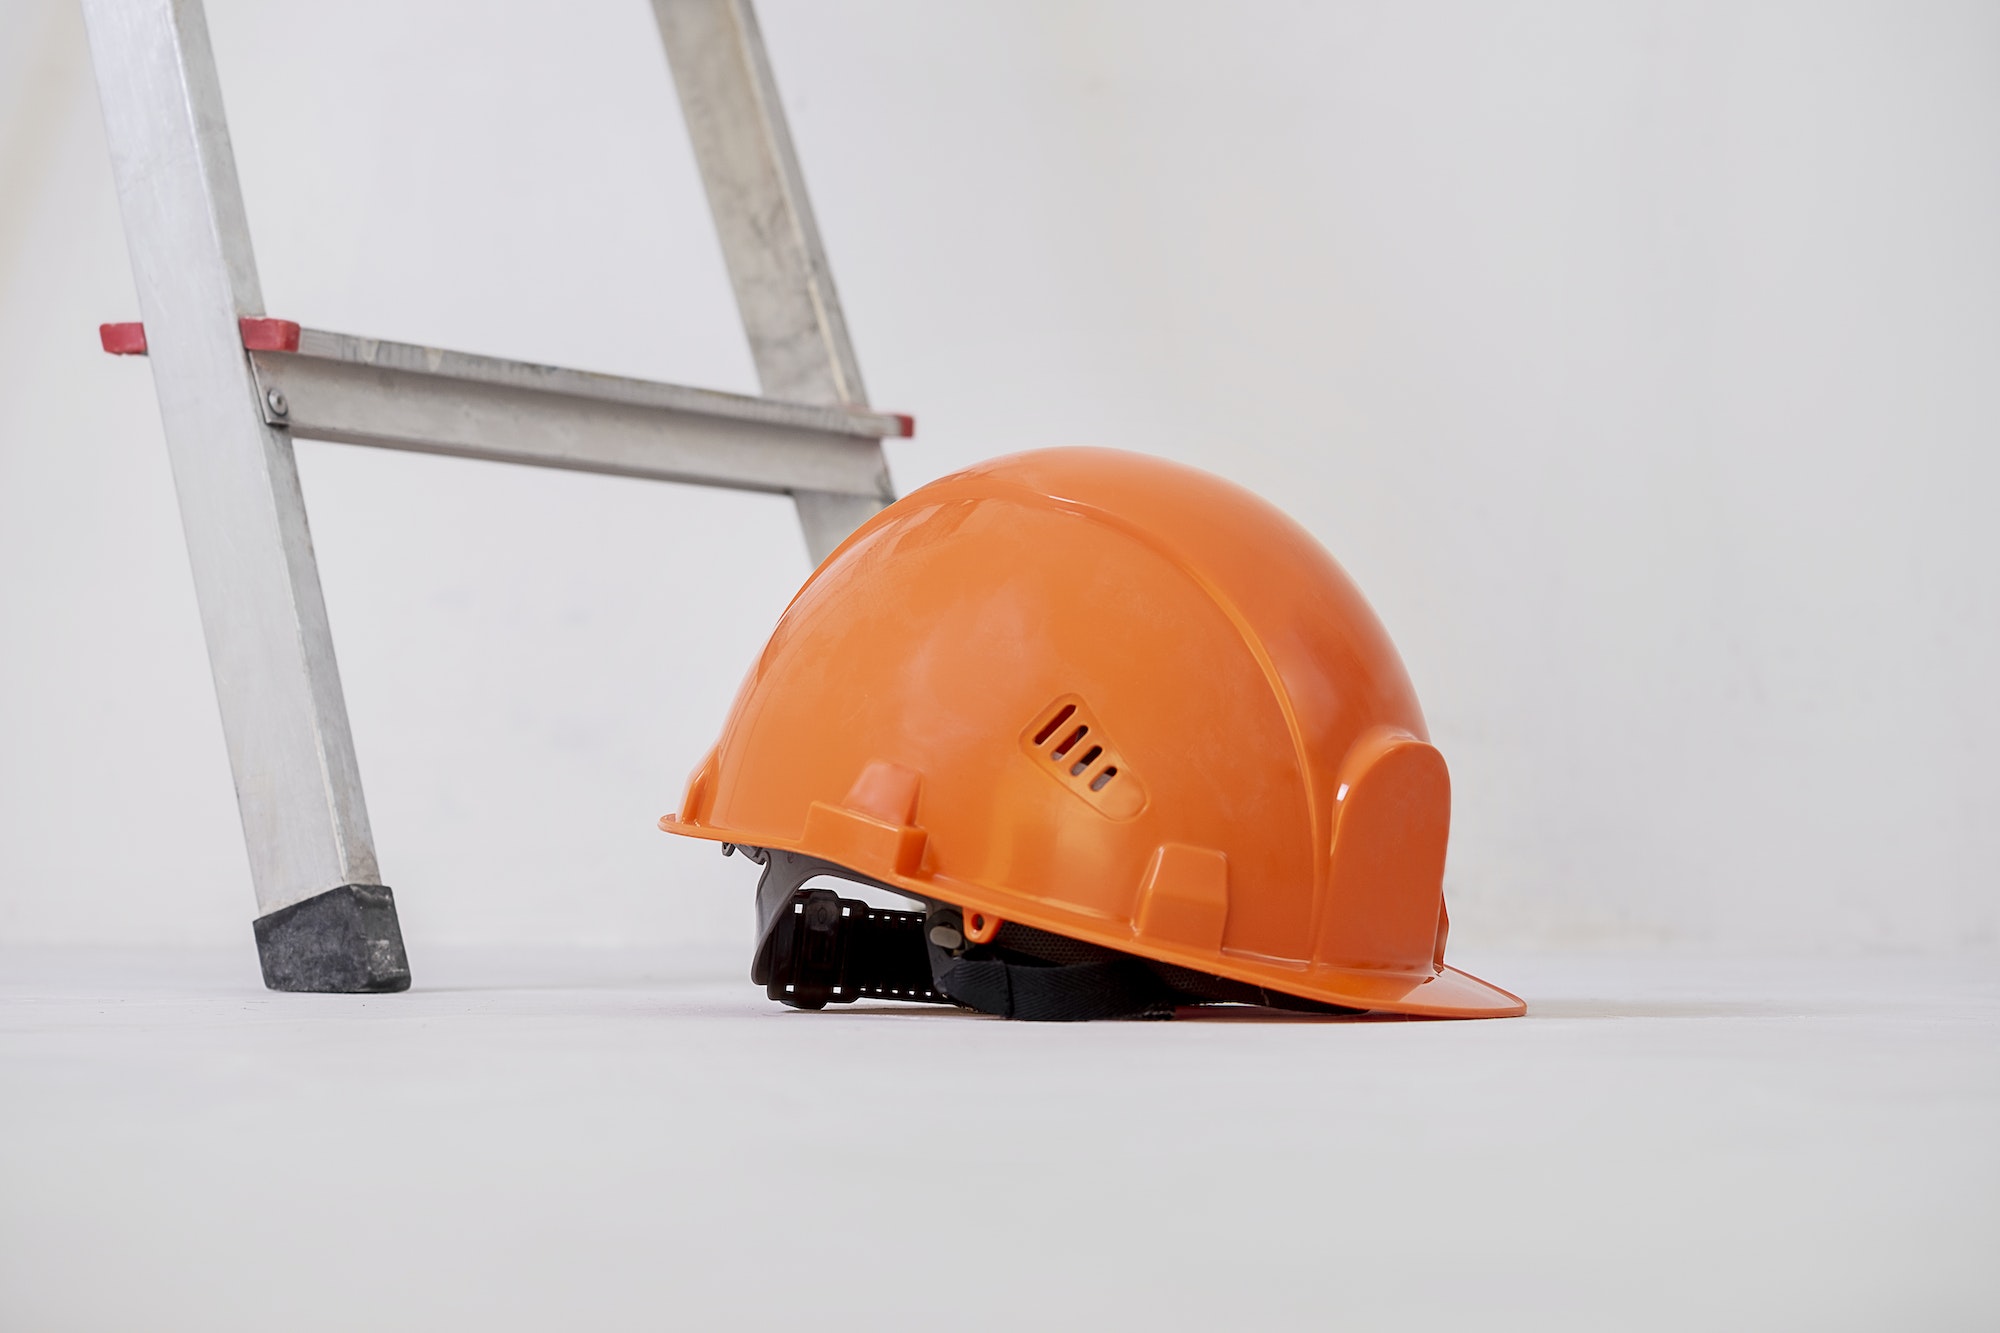 Construction helmet is lying next to stepladder against plaster wall.